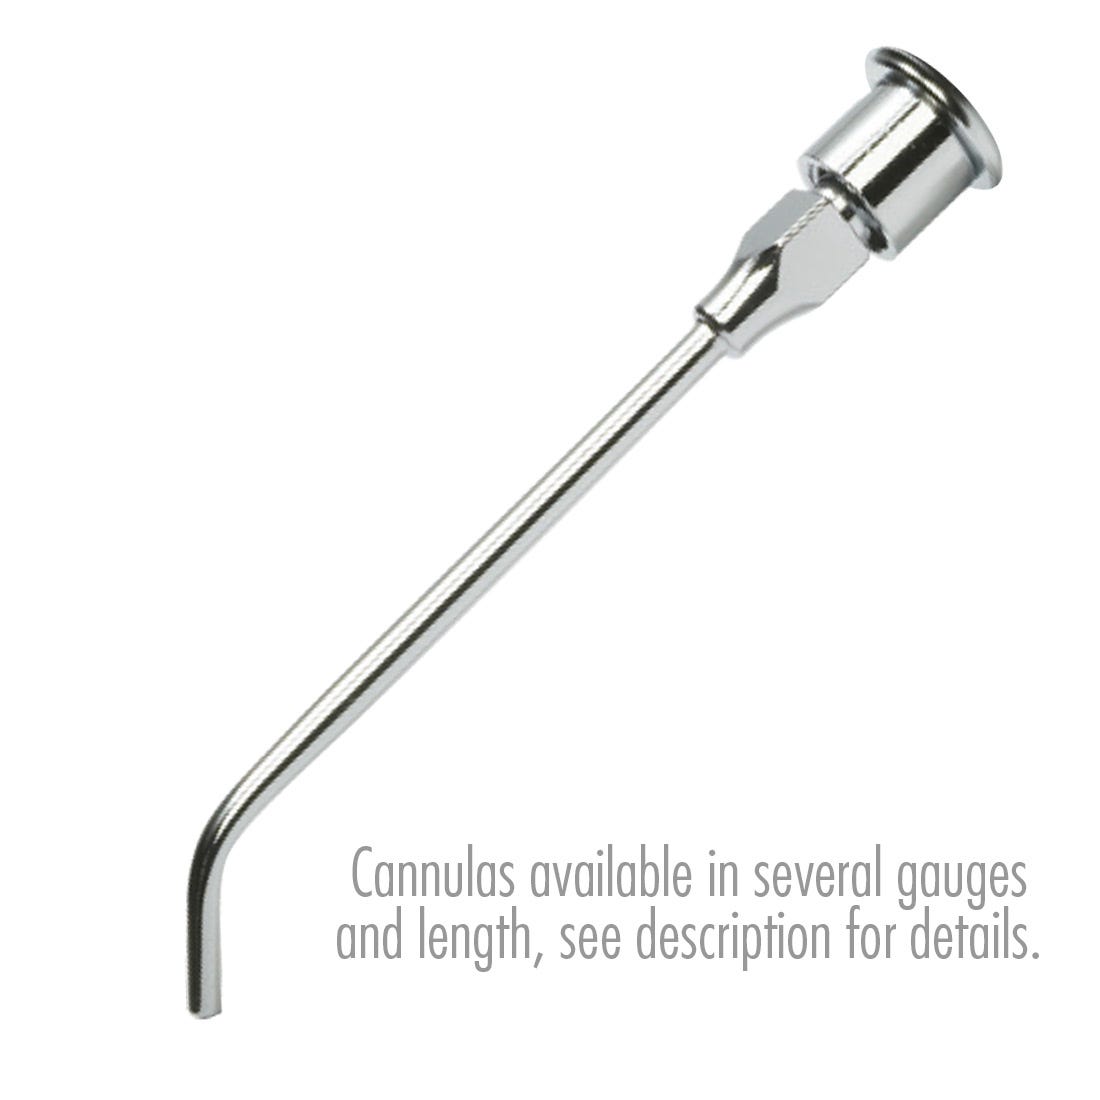 ACE Irrigation Cannula - Stainless Steel 18G x 3", 45 degree angle